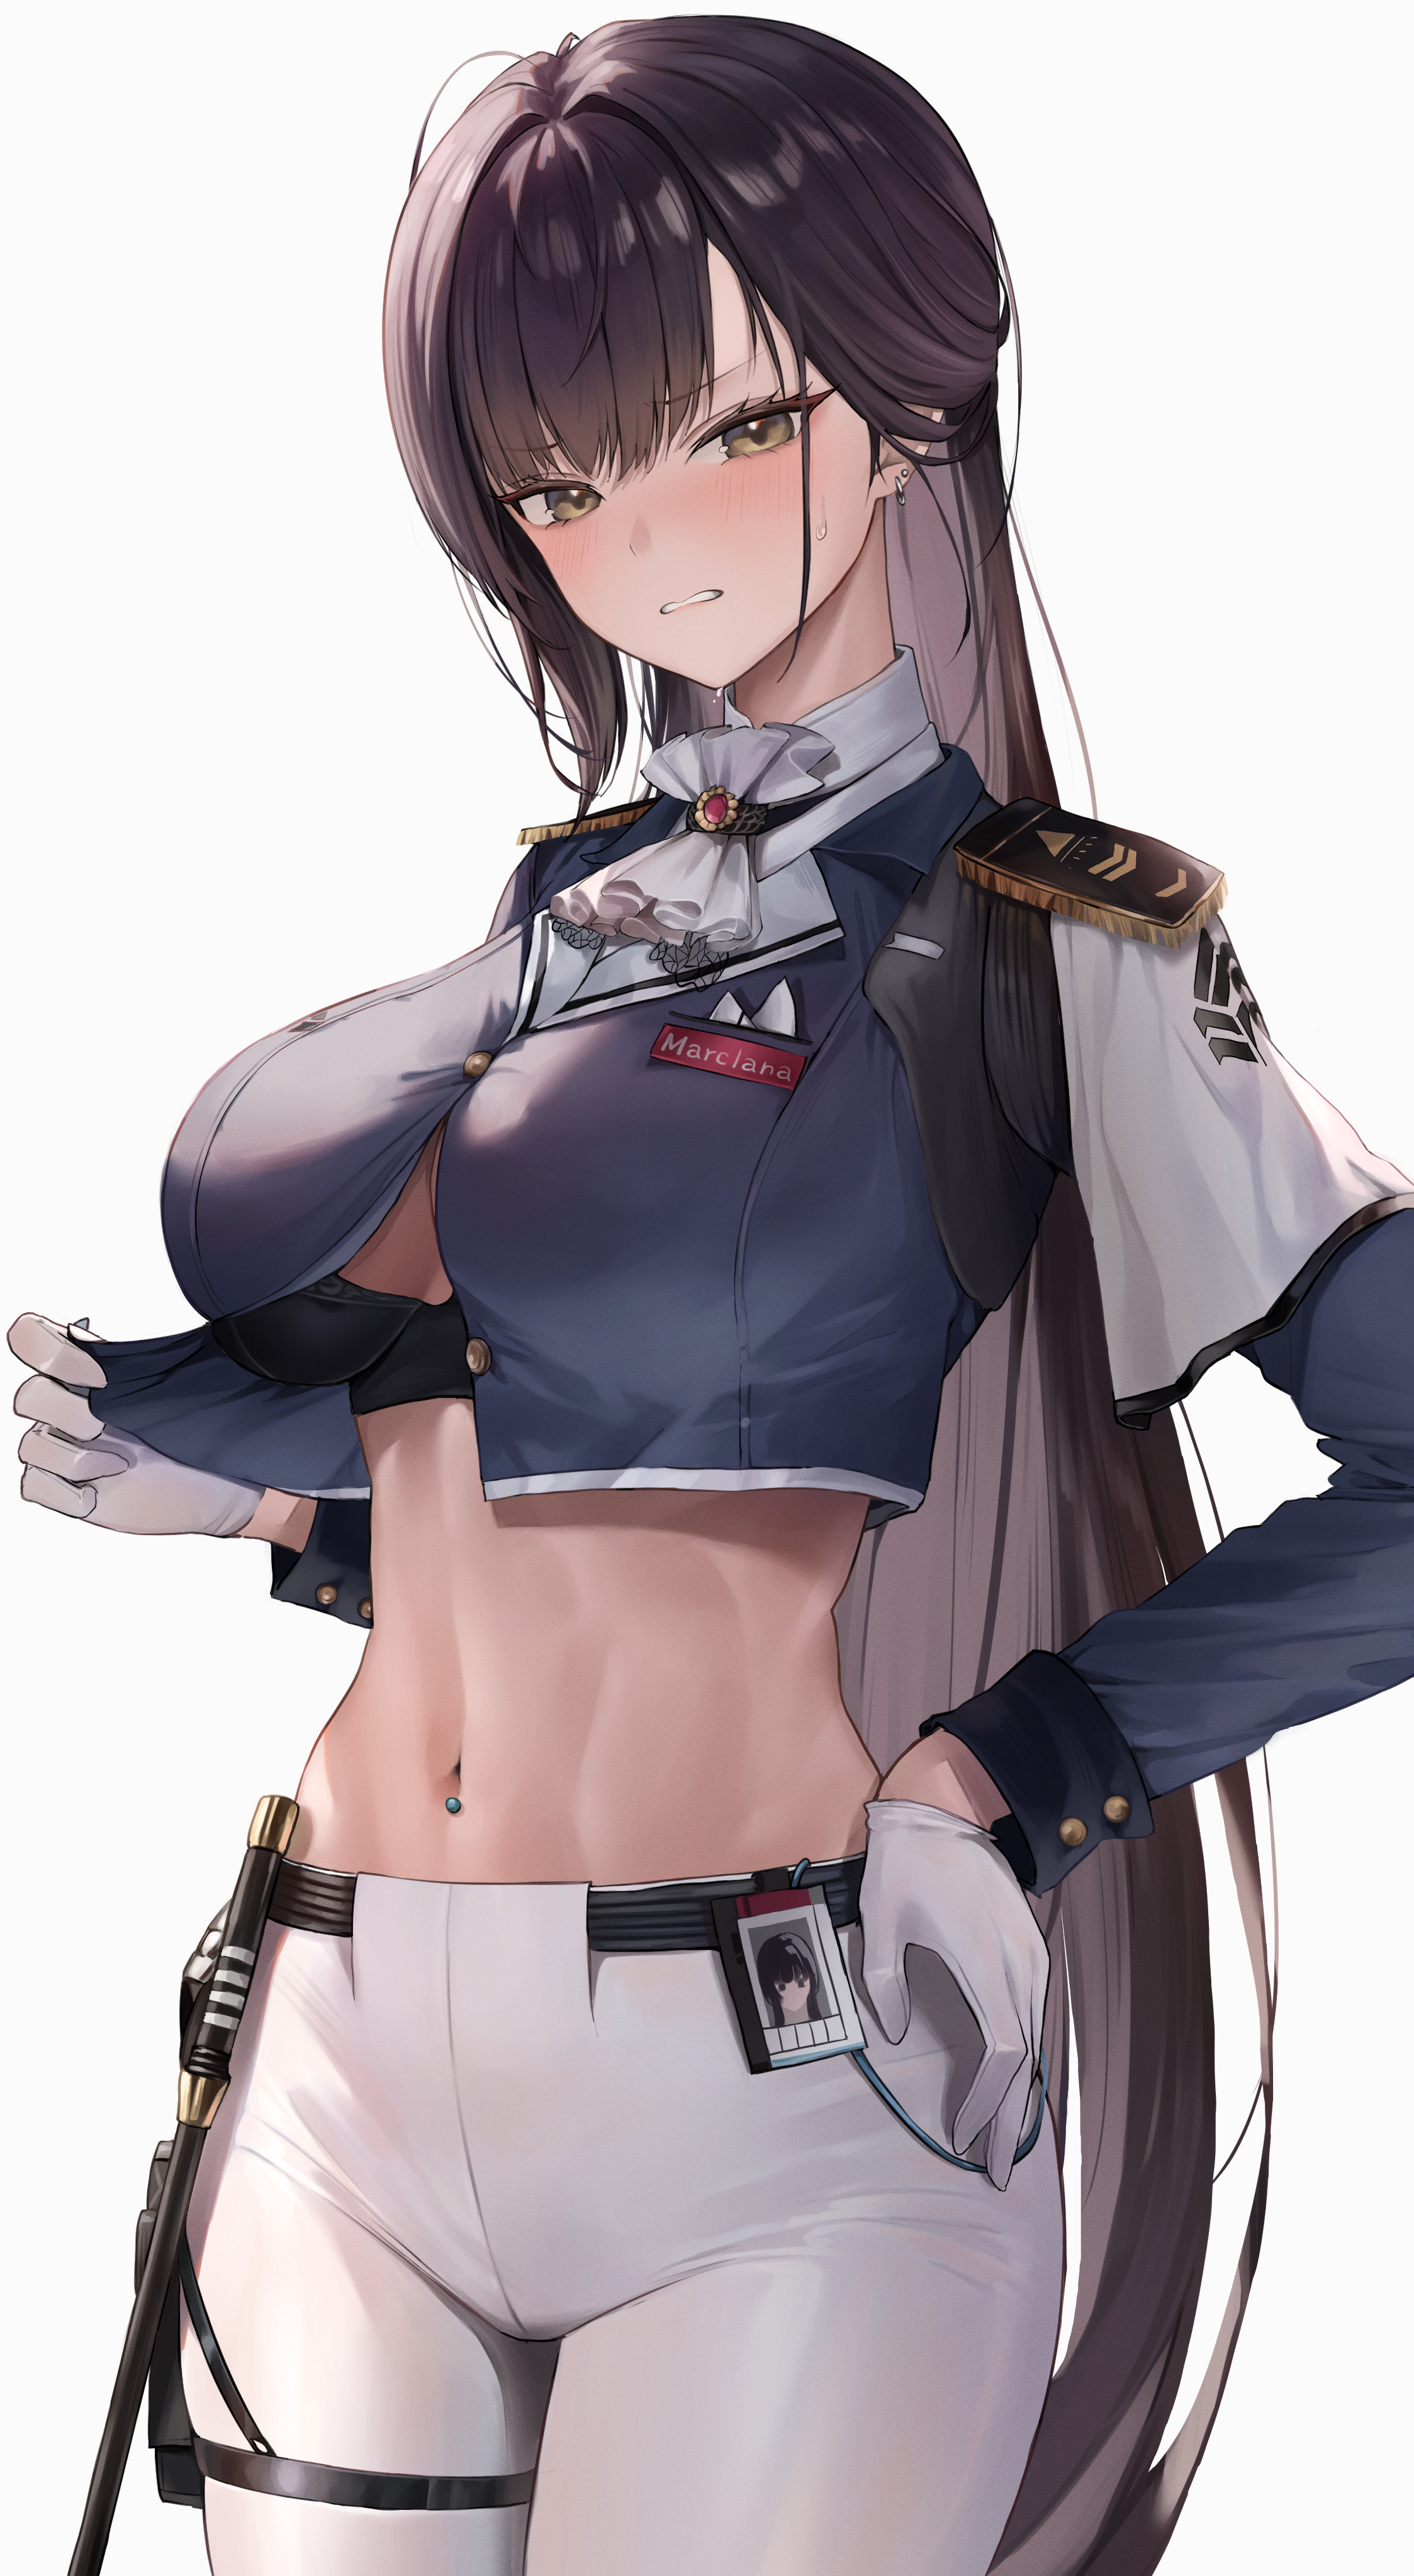 Anime 2247x4093 anime anime girls Pixiv Marciana Nikke: The Goddess of Victory video games gloves hands on hips long hair looking at viewer blushing sweatdrop ear piercing video game characters big boobs bra video game girls brunette brown eyes minimalism white background uniform